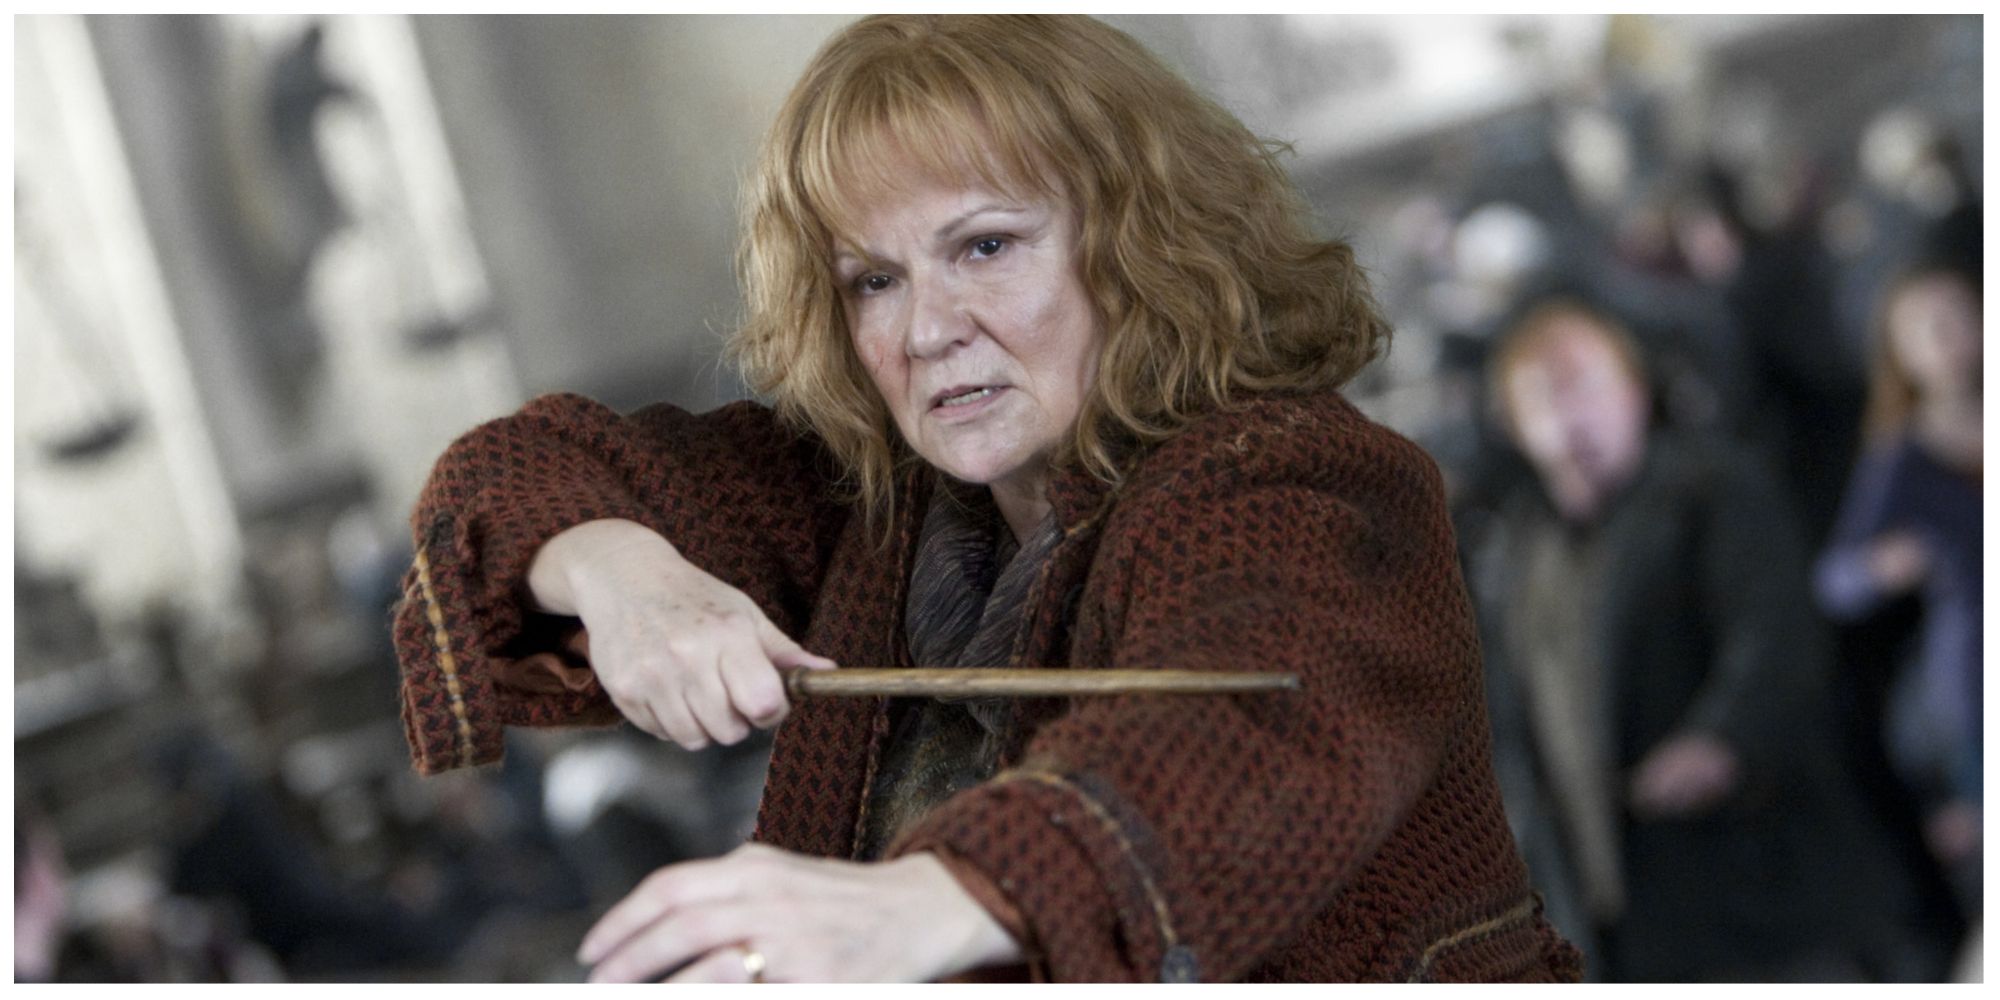 Molly Weasley in Harry Potter and The Deathly Hallows